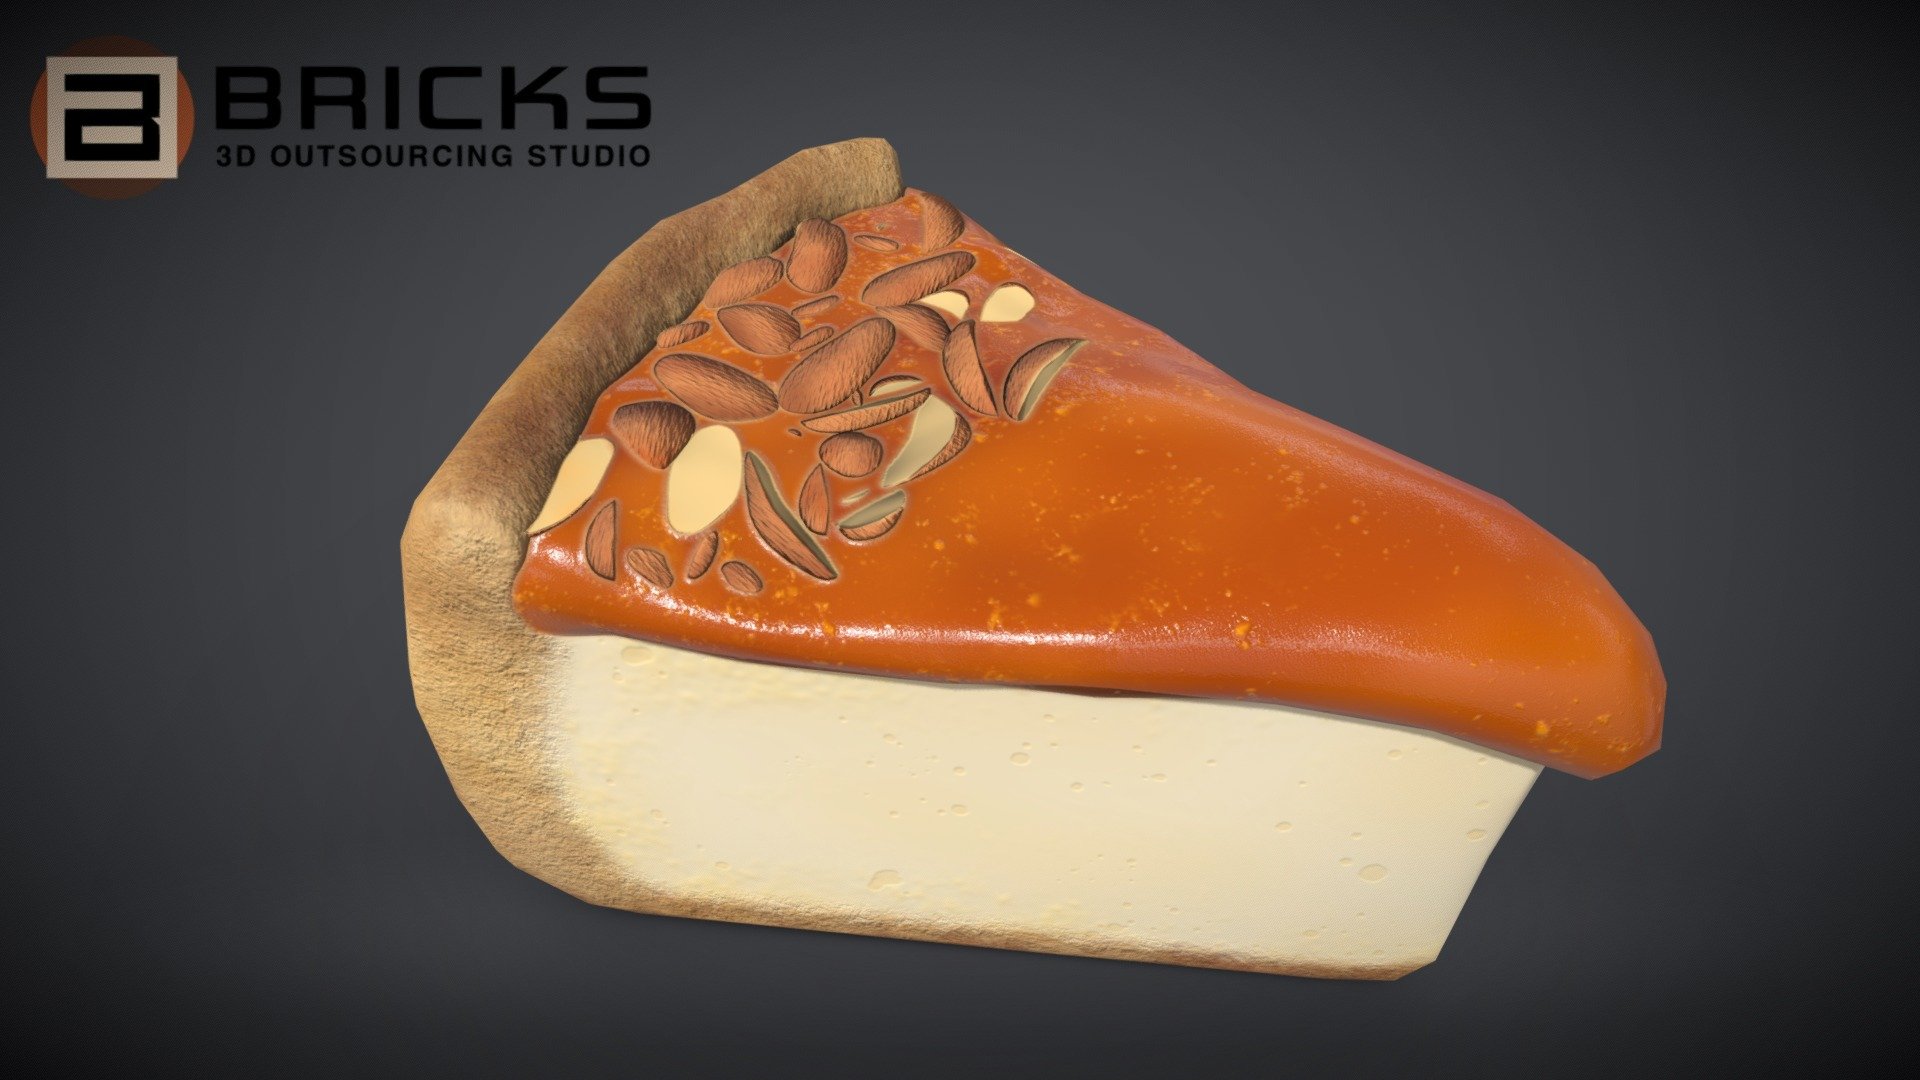 PBR Food Asset:
CheesecakeCaramelPiece
Polycount: 768
Vertex count: 386
Texture Size: 2048px x 2048px
Normal: OpenGL

If you need any adjust in file please contact us: team@bricks3dstudio.com

Hire us: tringuyen@bricks3dstudio.com
Here is us: https://www.bricks3dstudio.com/
        https://www.artstation.com/bricksstudio
        https://www.facebook.com/Bricks3dstudio/
        https://www.linkedin.com/in/bricks-studio-b10462252/ - CheesecakeCaramelPiece - Buy Royalty Free 3D model by Bricks Studio (@bricks3dstudio) 3d model